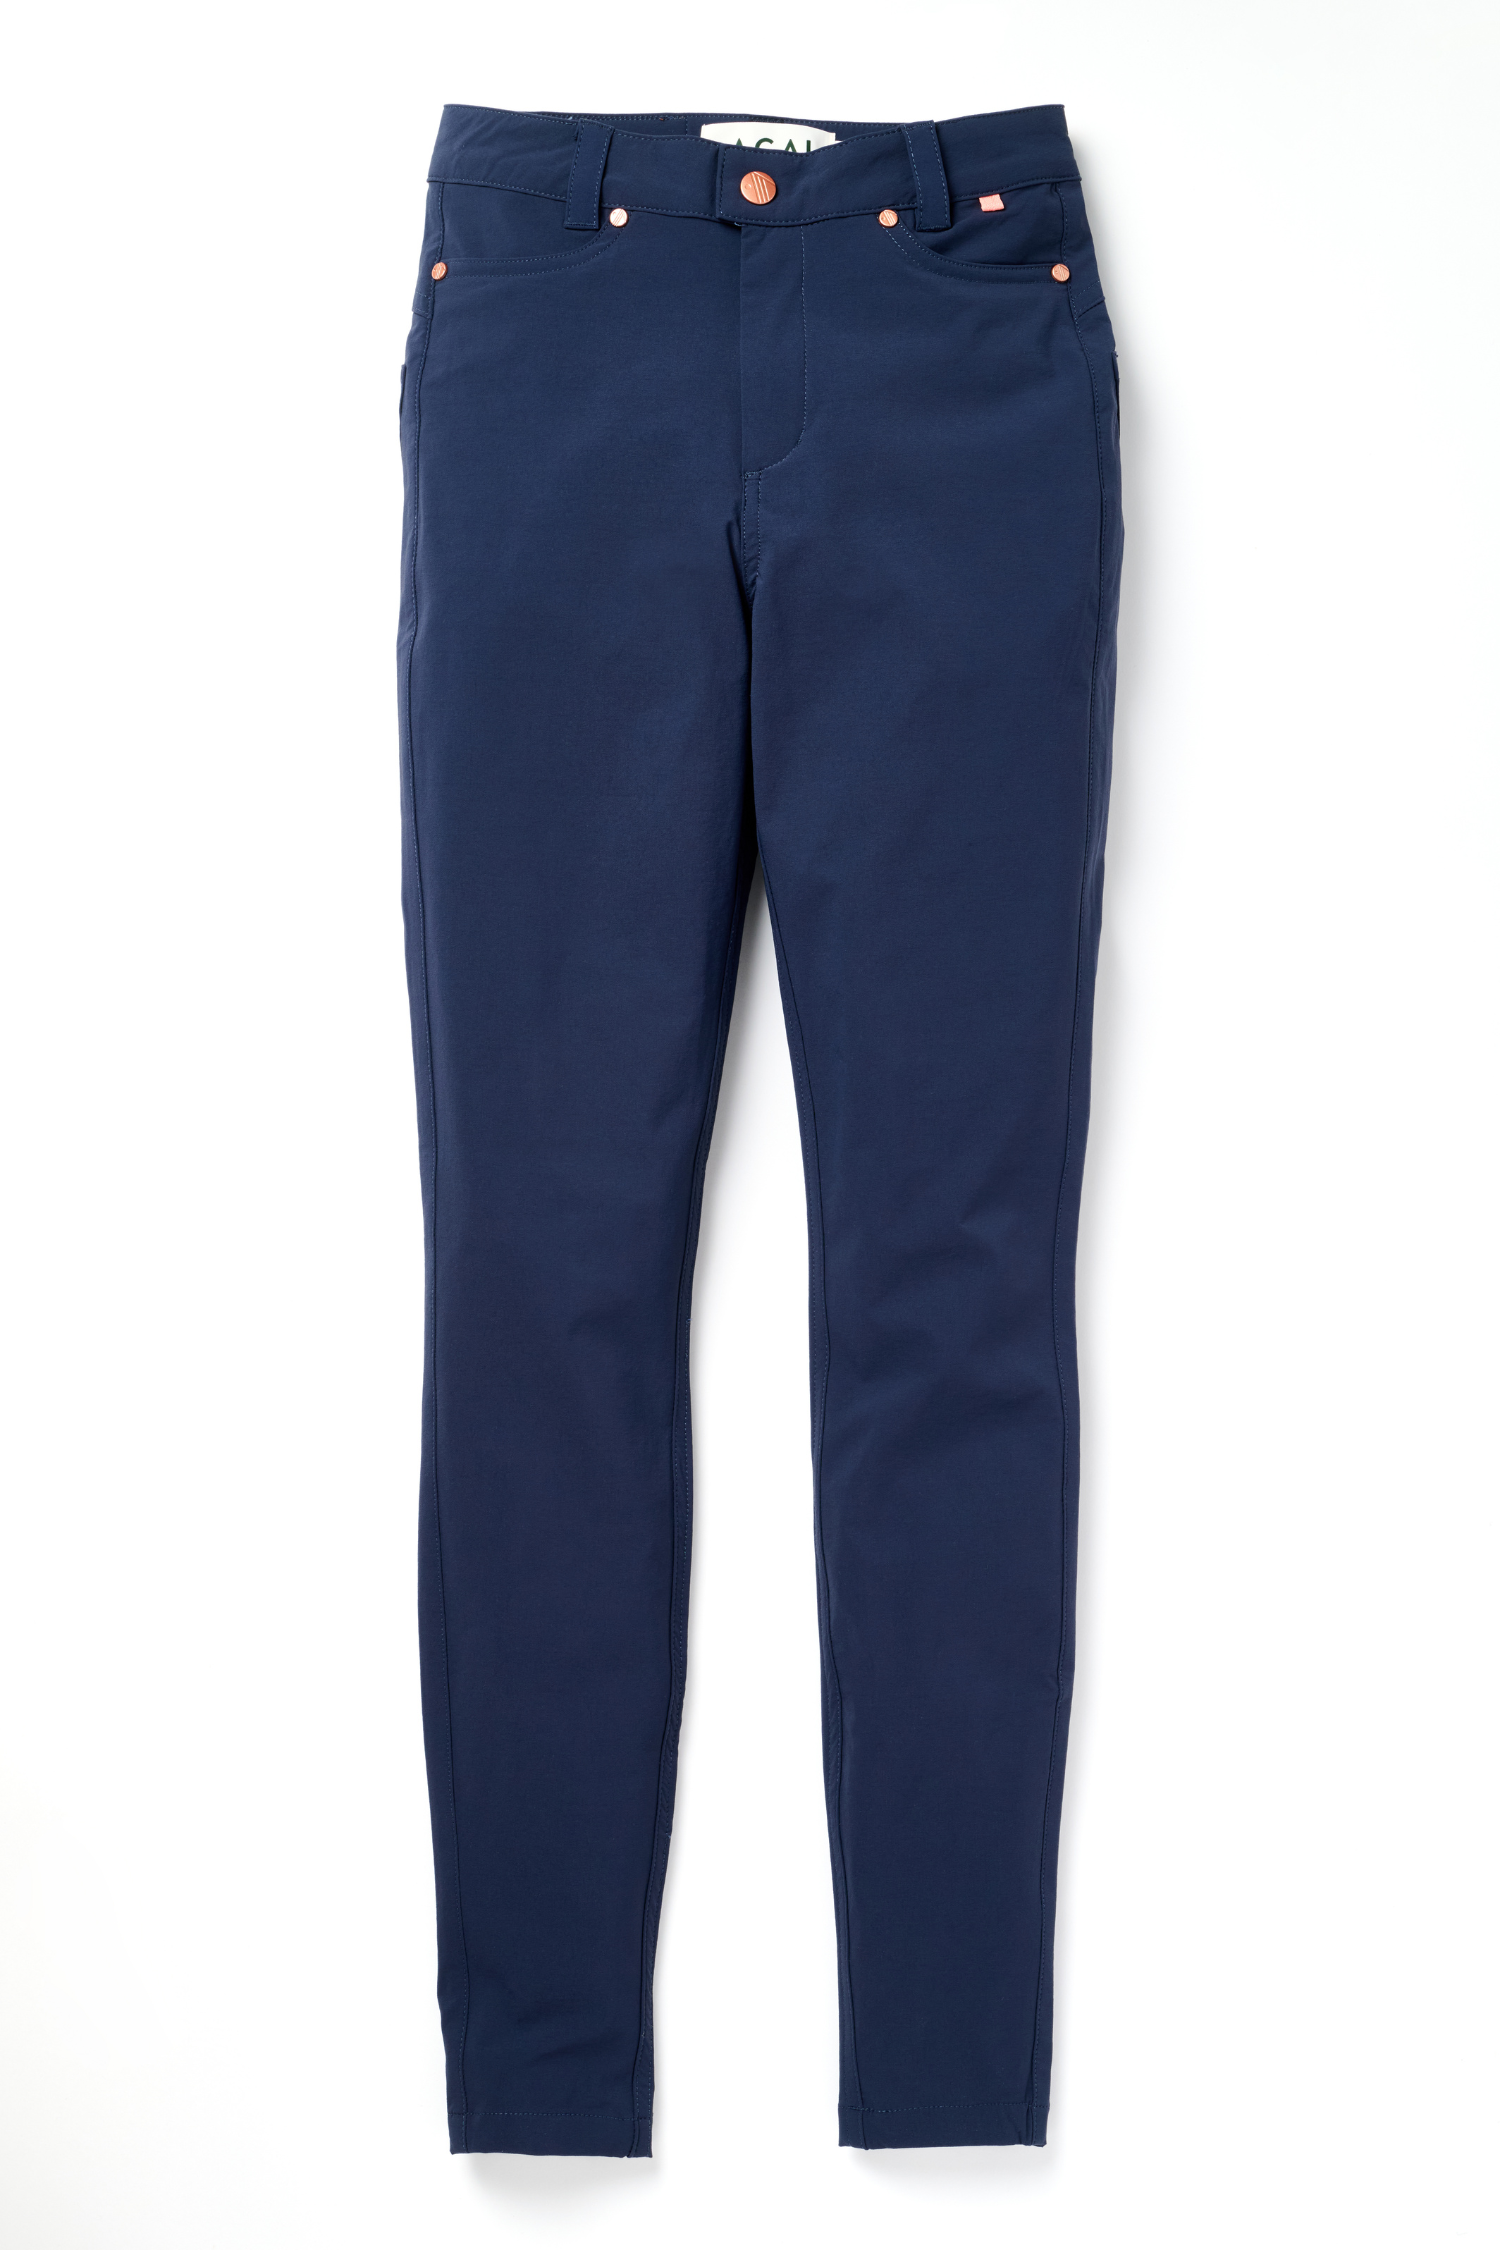 MAX Stretch Skinny Outdoor Trousers - Deep Navy Trousers  